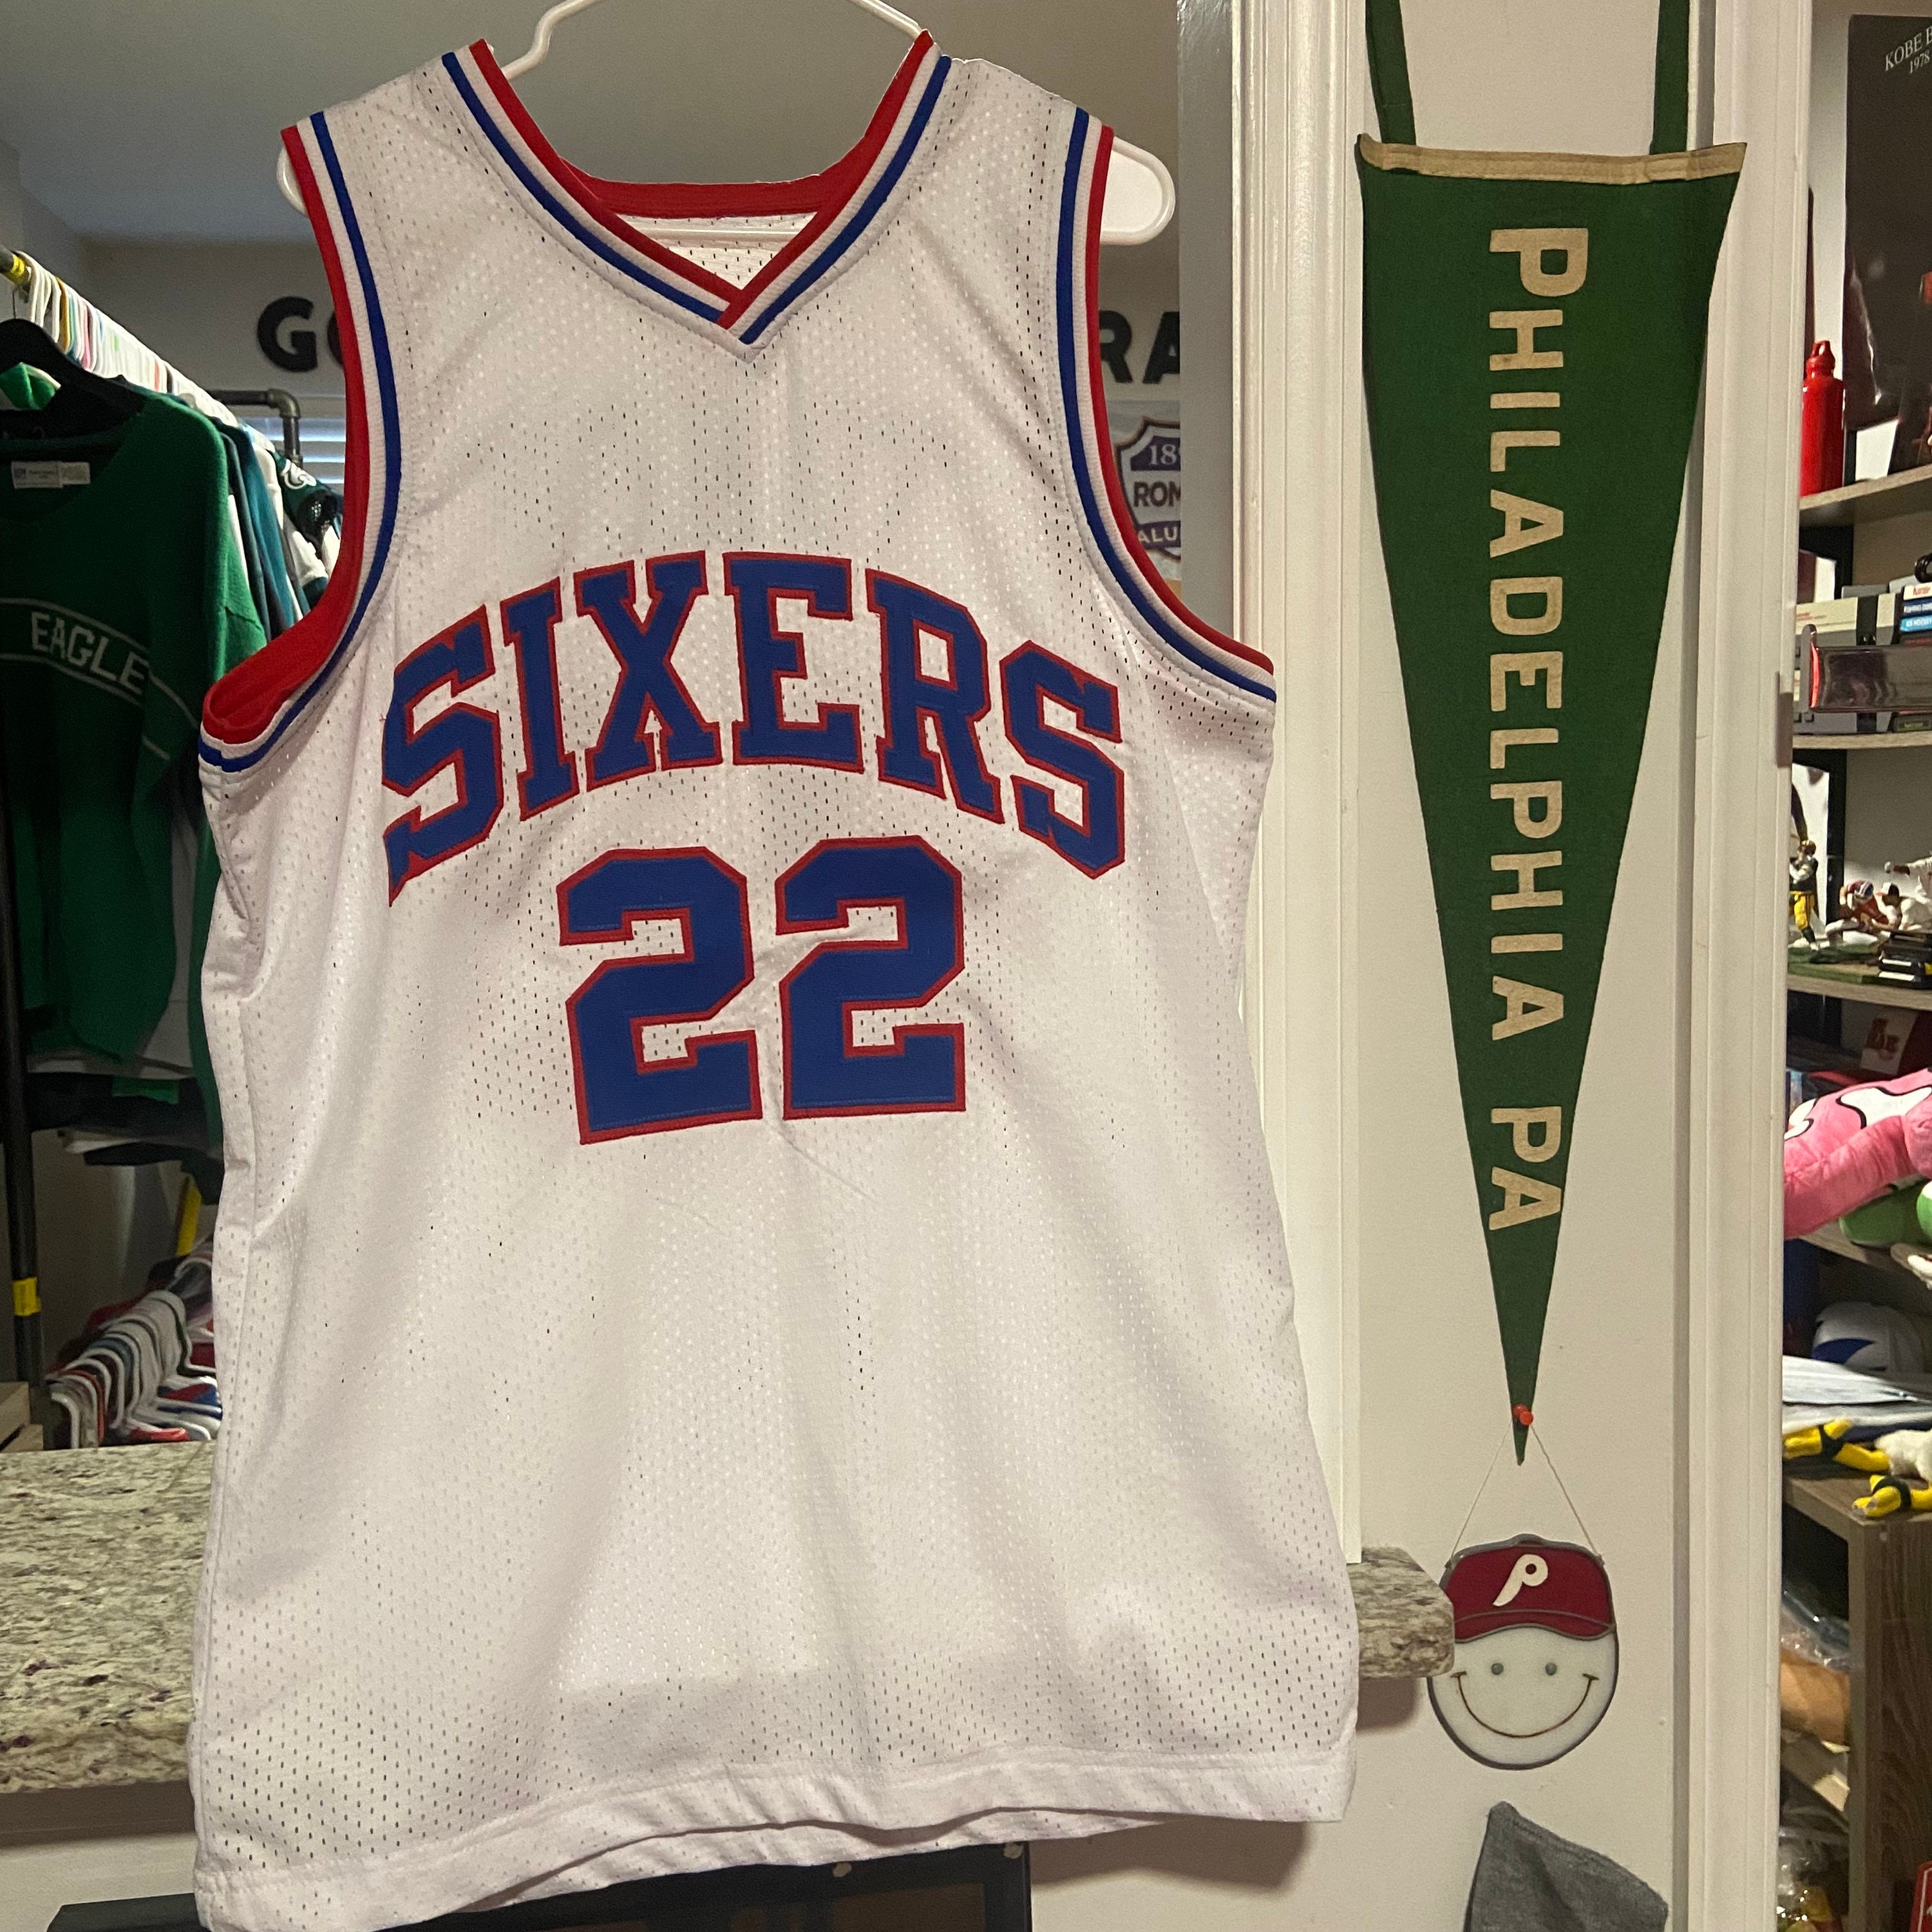 Philadelphia 76ers Signed Jerseys, Collectible 76ers Jerseys, Philadelphia  76ers Memorabilia Jerseys